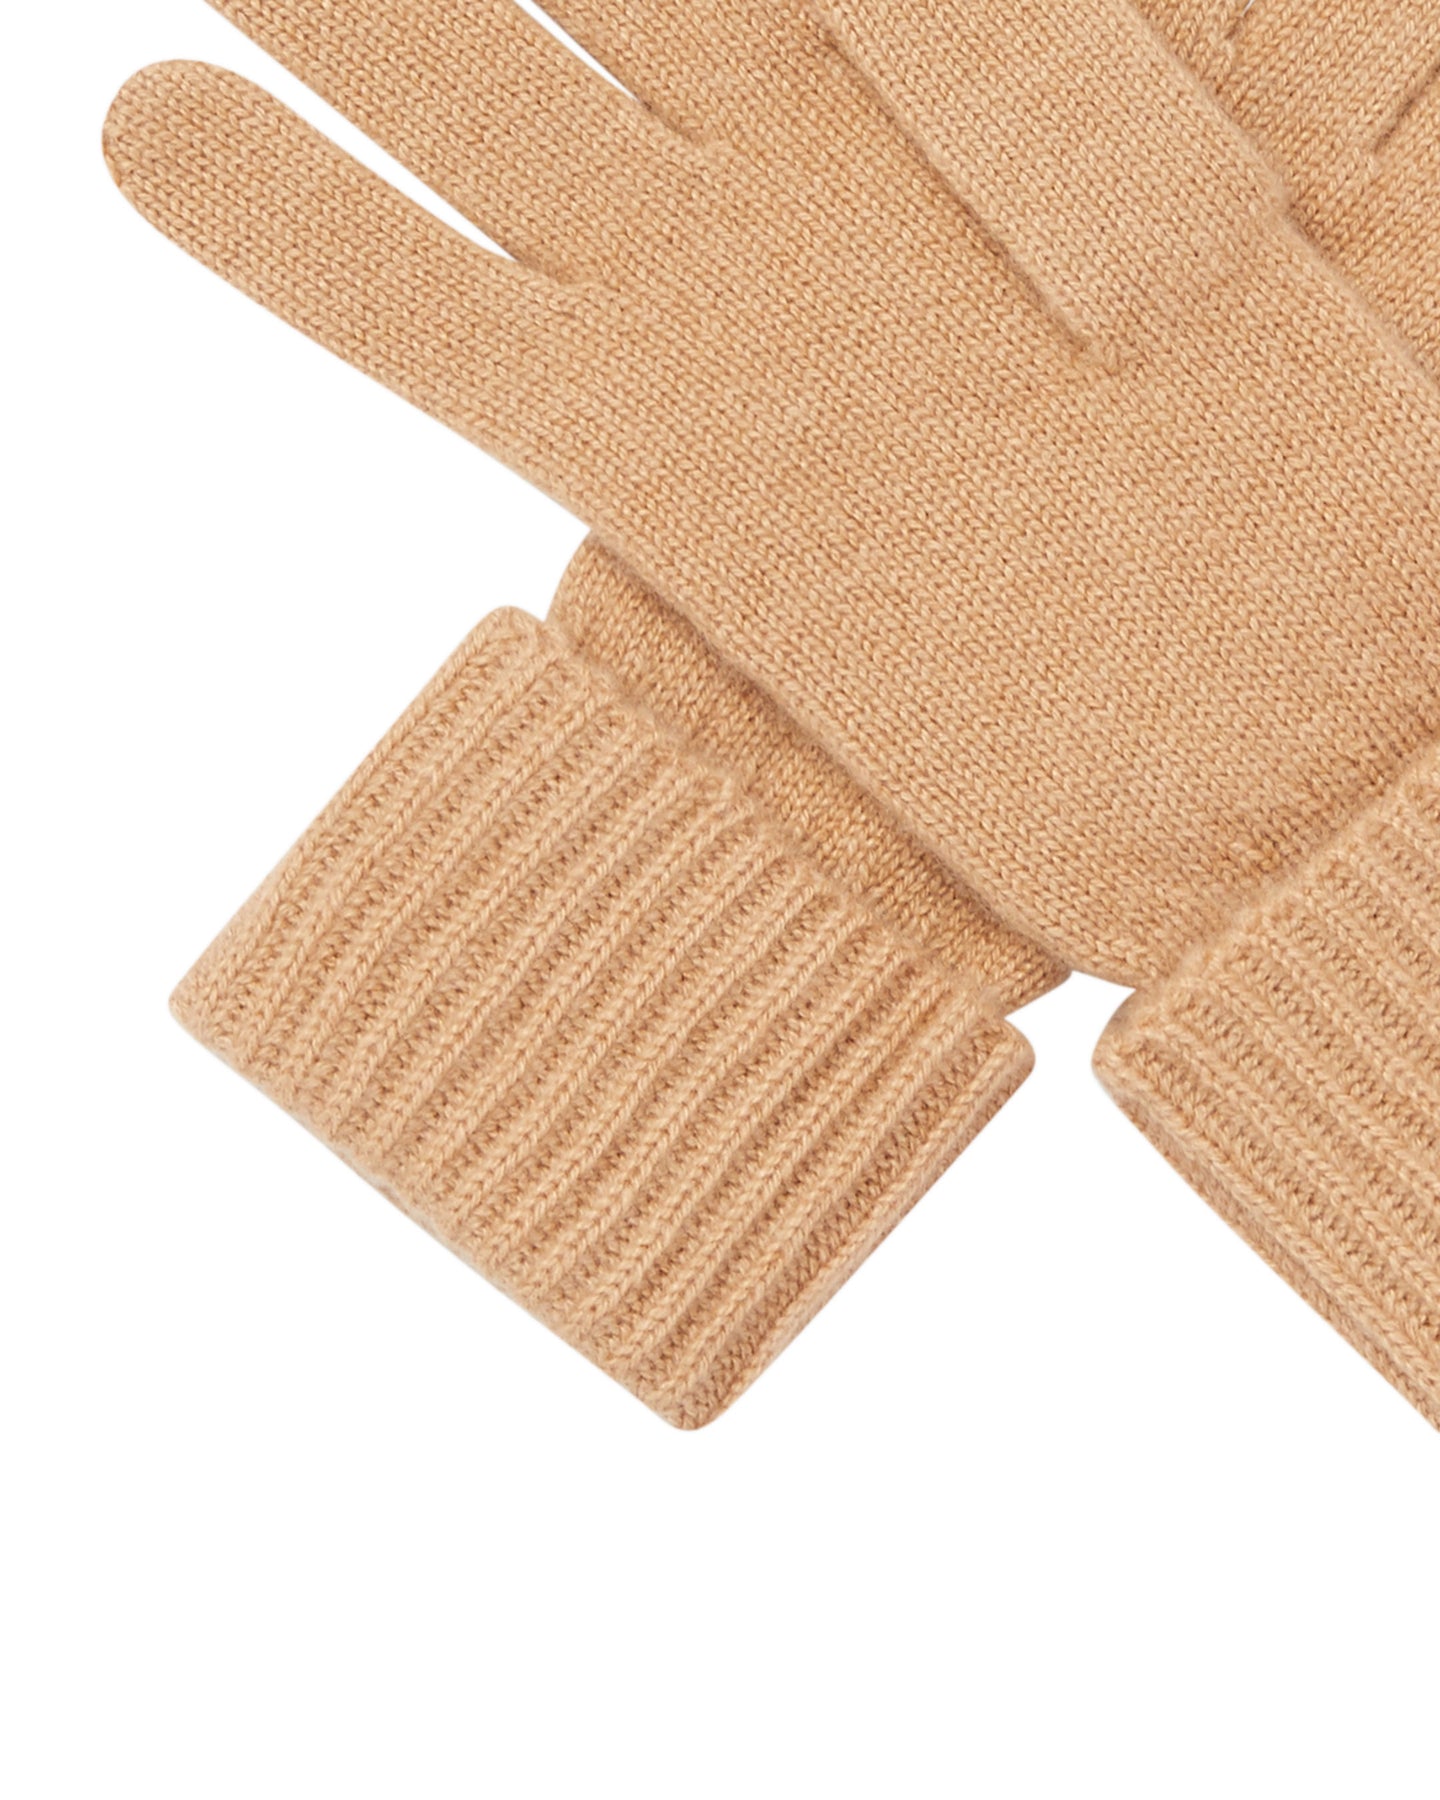 N.Peal Women's Ribbed Cashmere Gloves Camel Brown